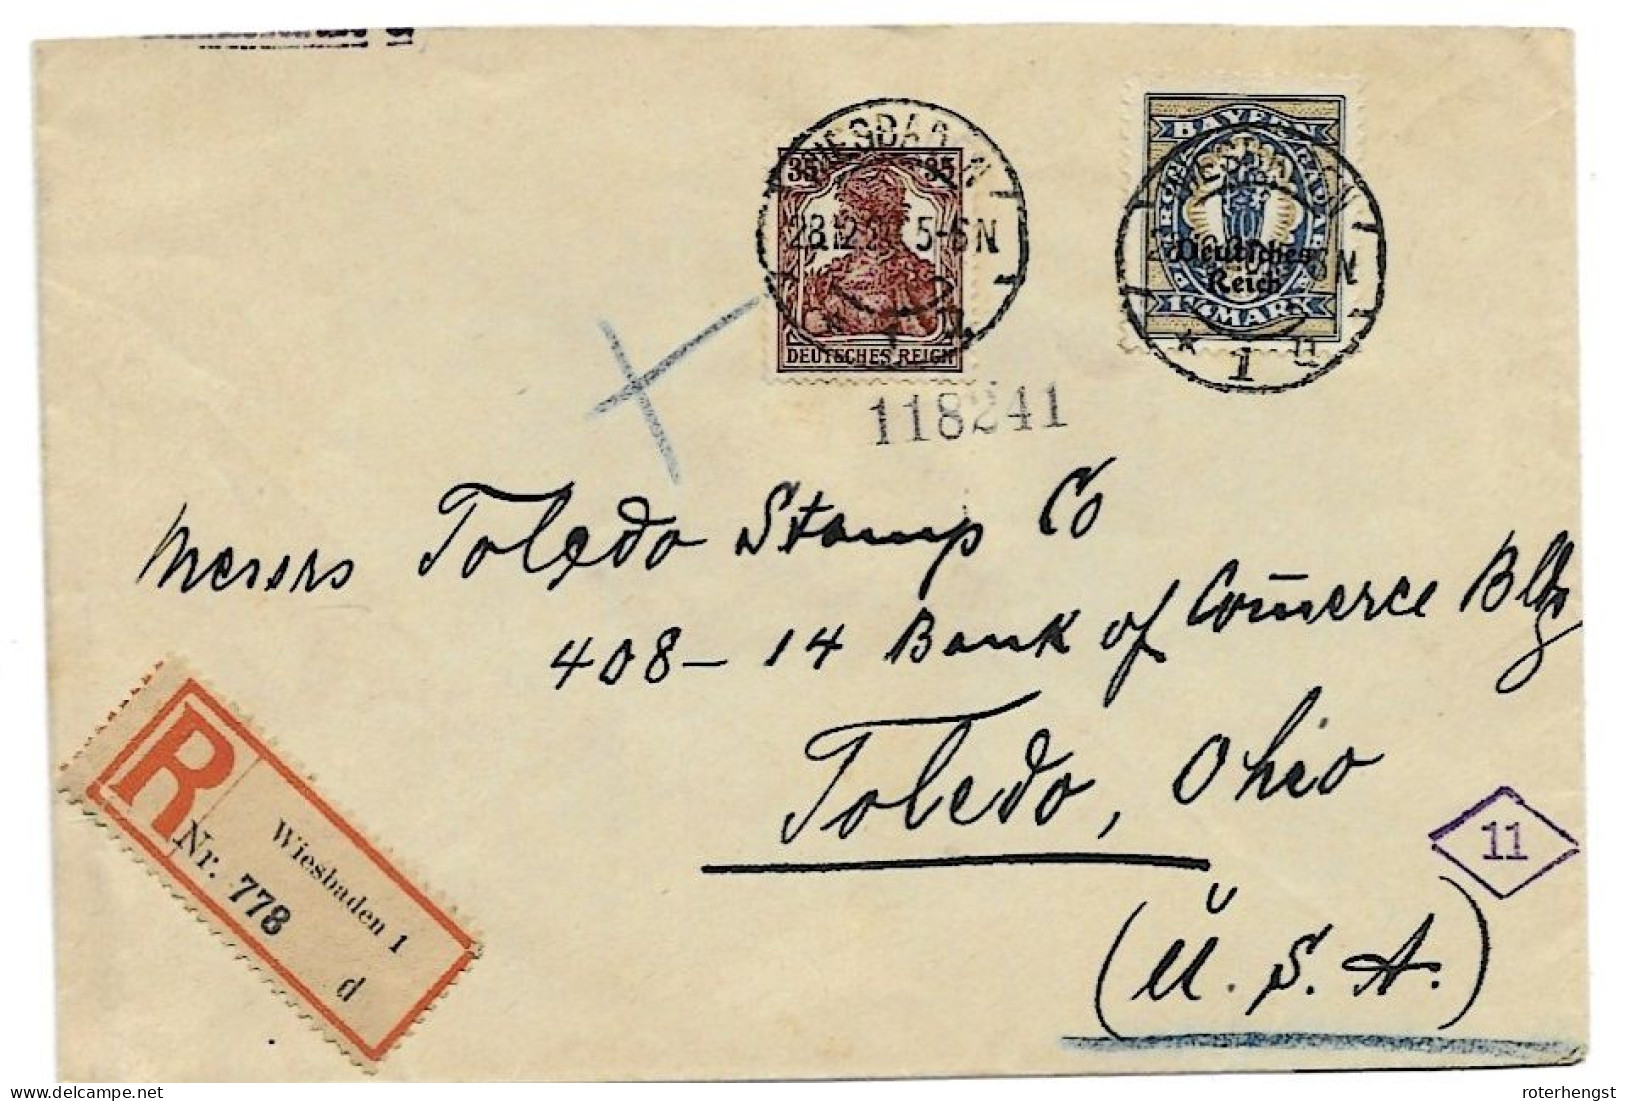 Germany Wiesbaden R-letter To USA 28.12.1920 (arrival And Transit Cancels On Back) - Lettres & Documents